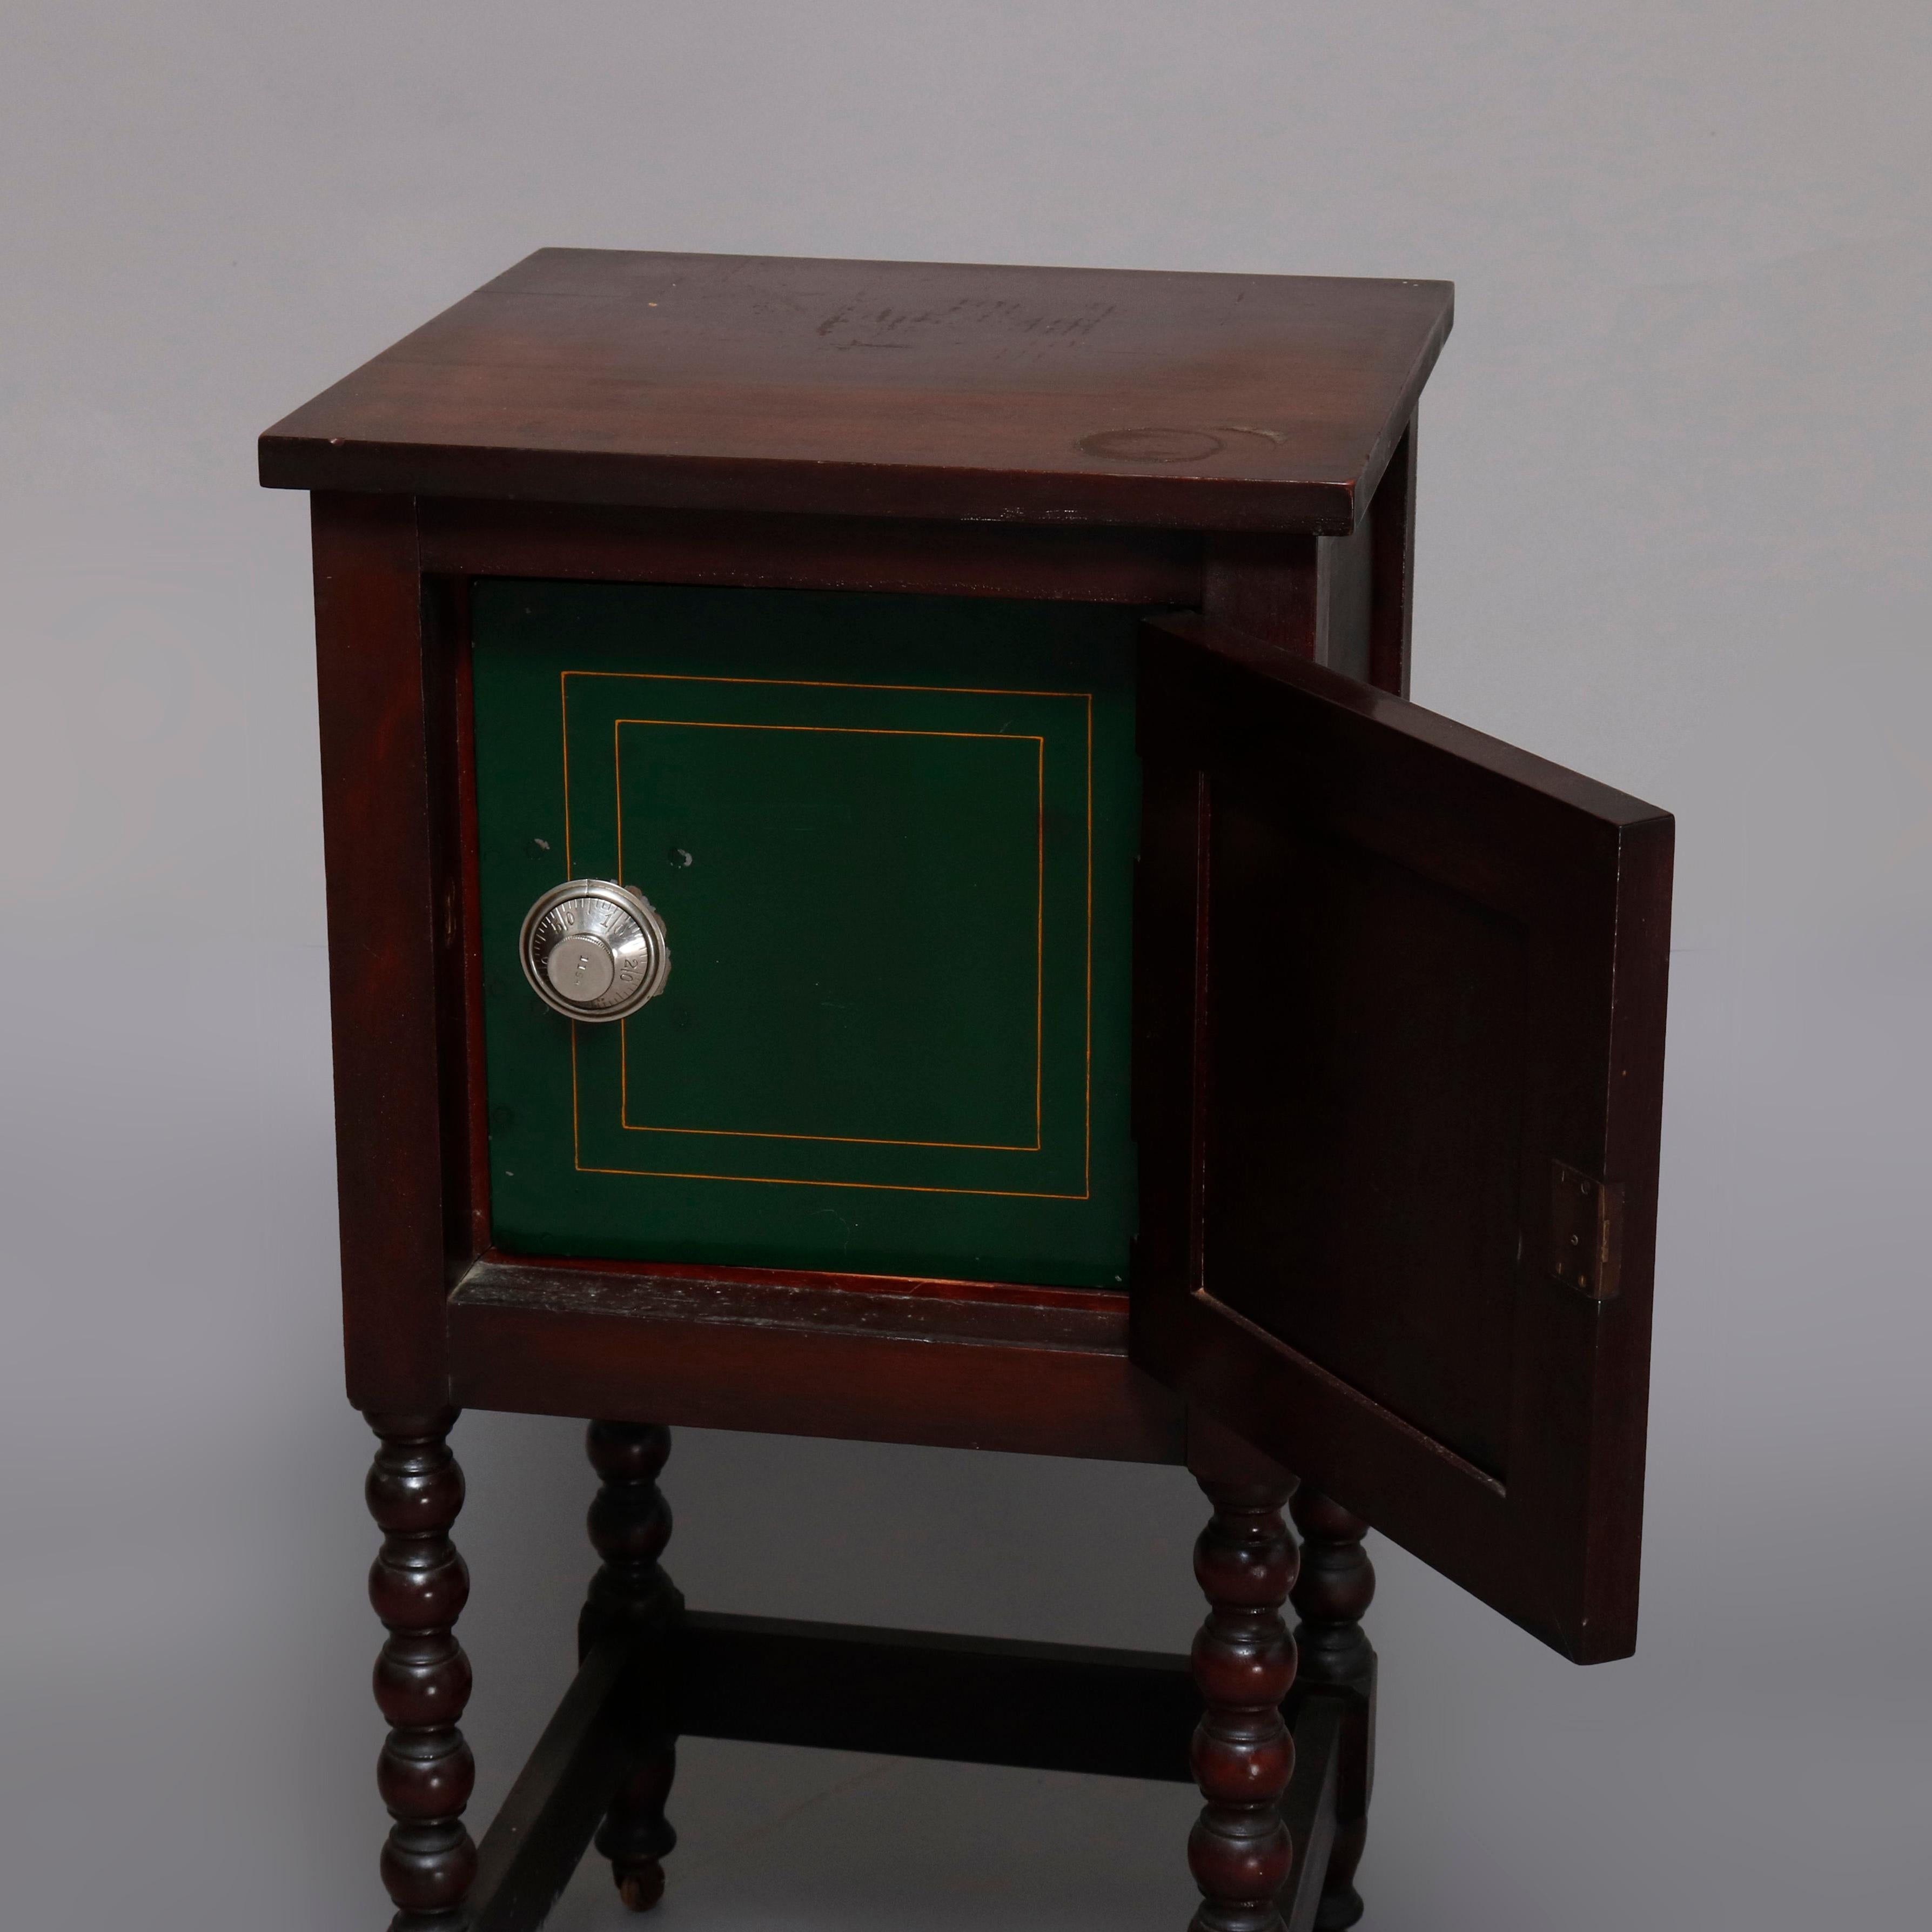 An antique English Edwardian style cabinet safe offers mahogany construction with upper single door cabinet opening to reveal combination safe, raised on carved bobbin legs terminating in casters, circa 1920

Measures: 31.5